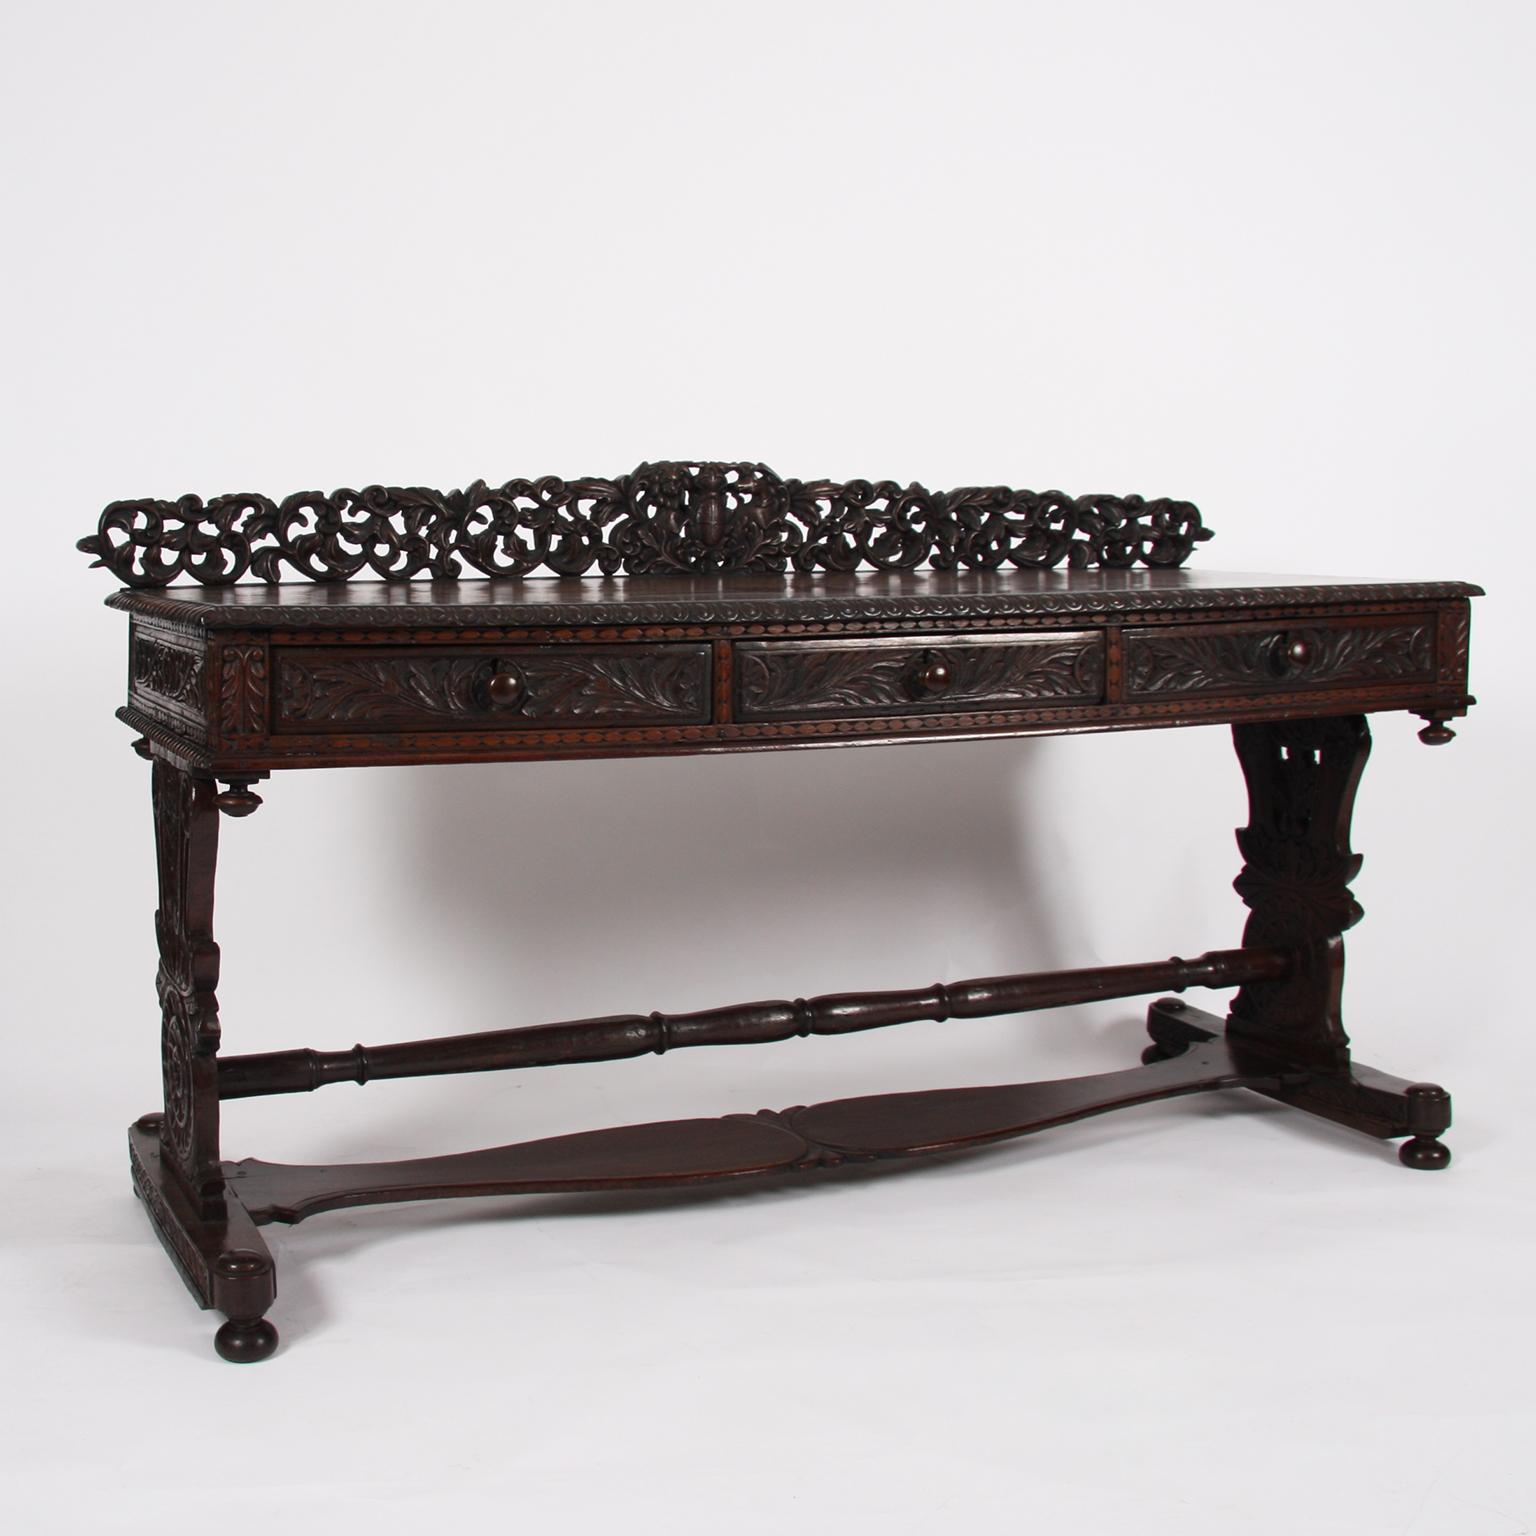 Indian, 19th century

A stunning Anglo-Indian, carved wood, desk. Beautifully detailed. 

This unique table can be used as a desk, console table or serving table.